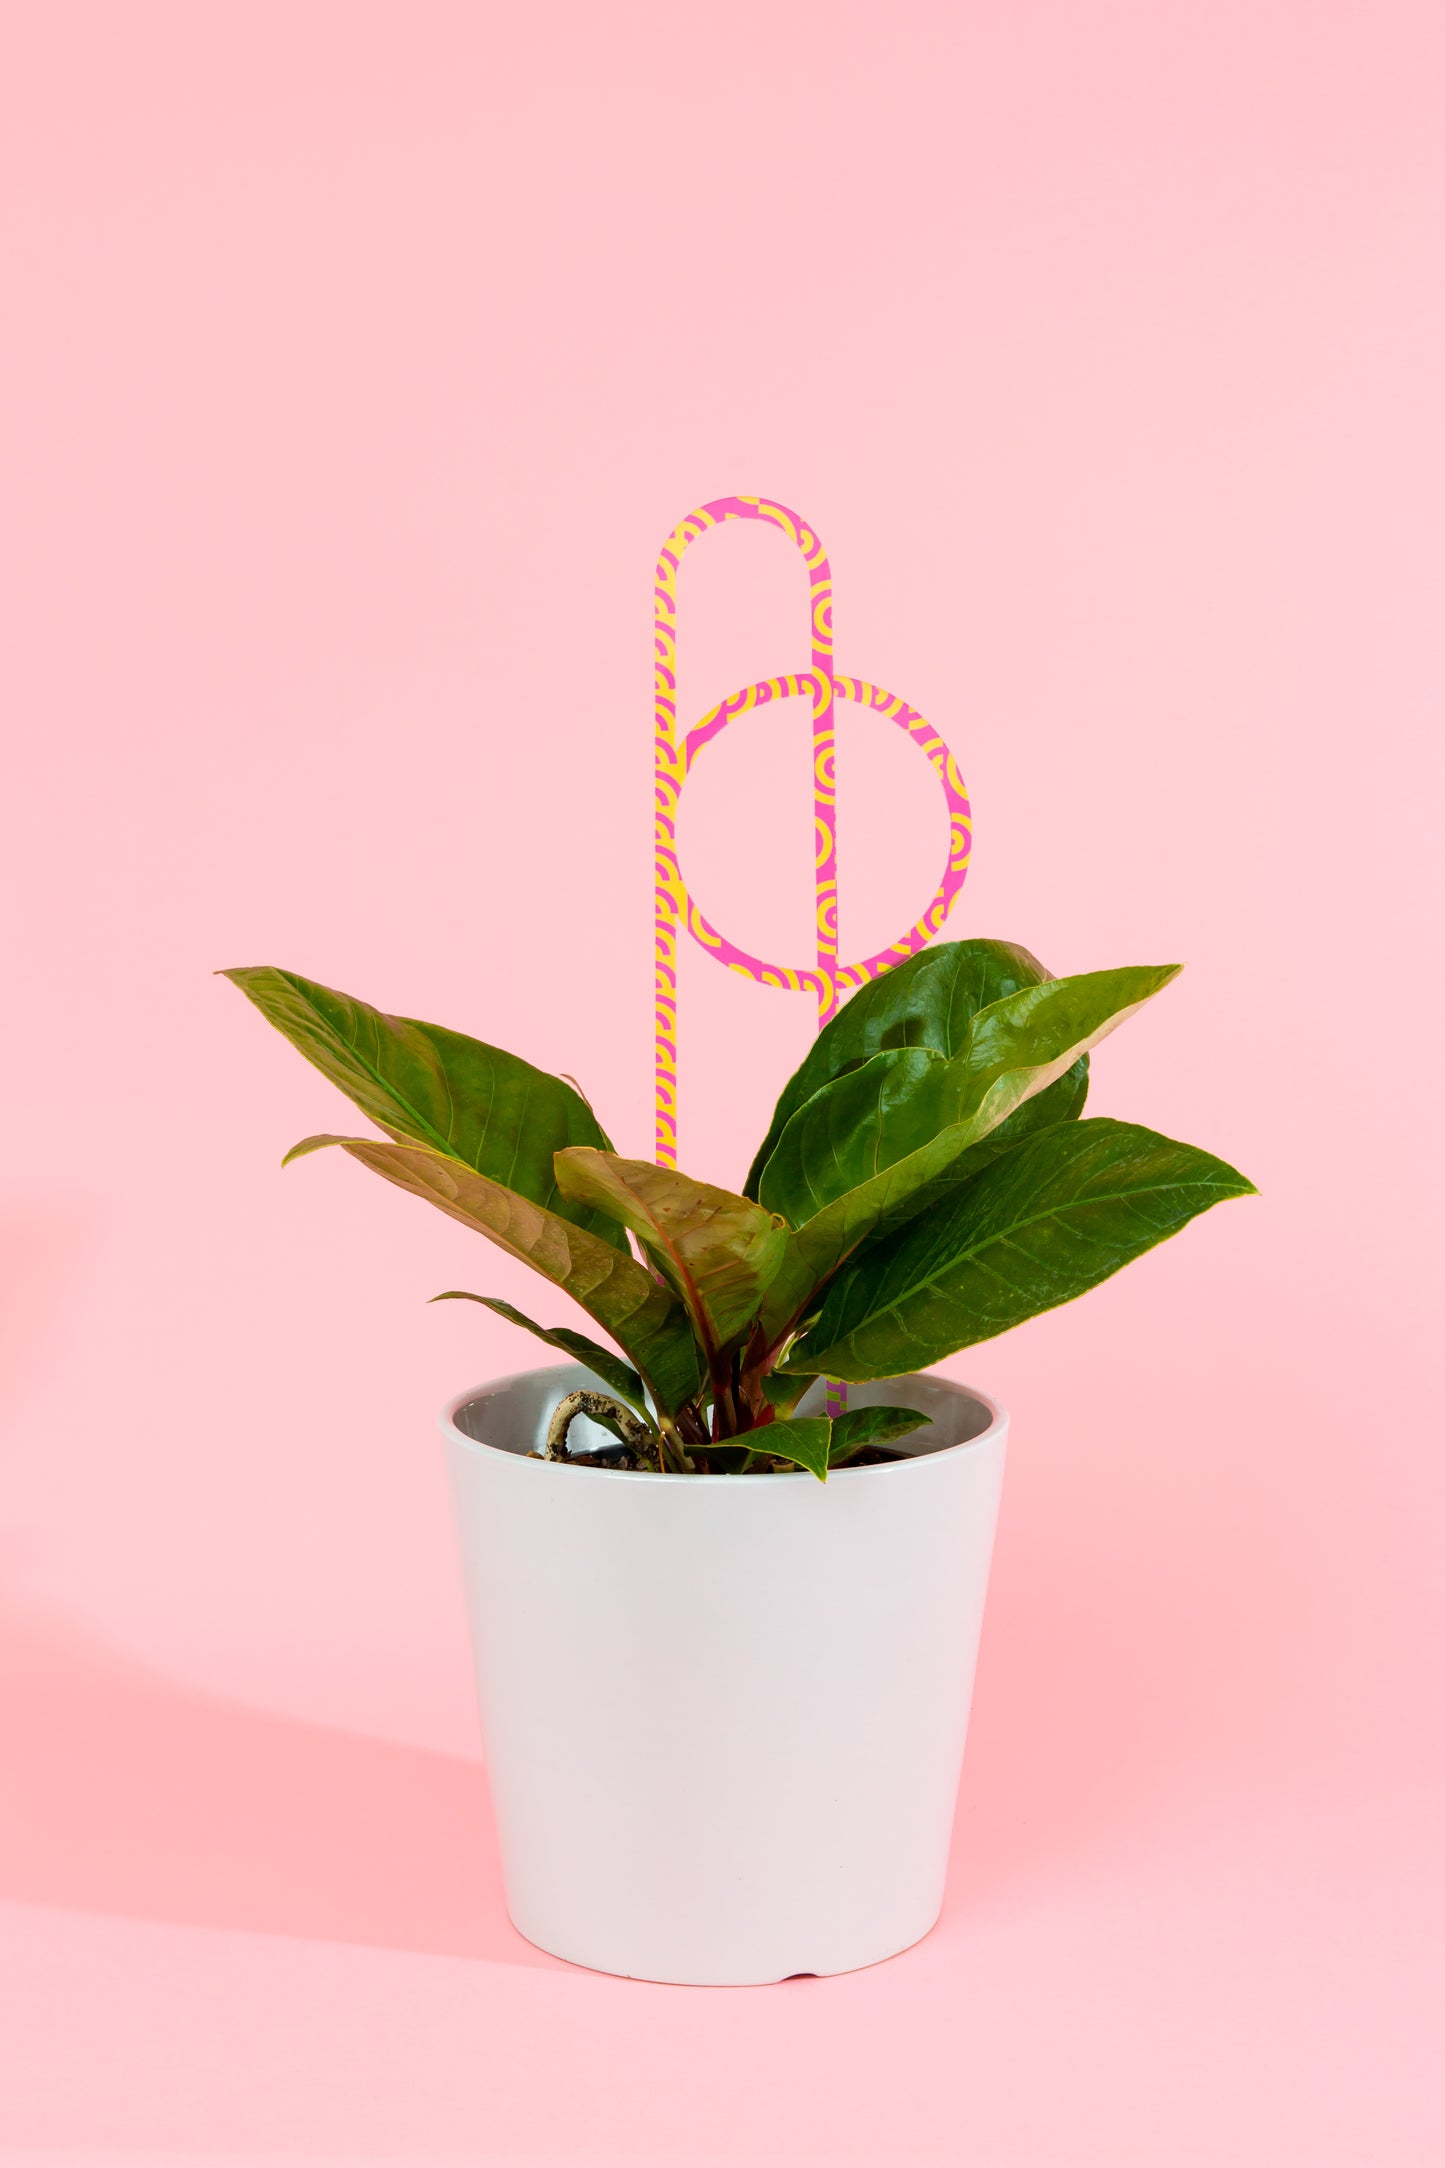 Acrylic Plant Stake 2 - Printed Large Pink & Lime Arch